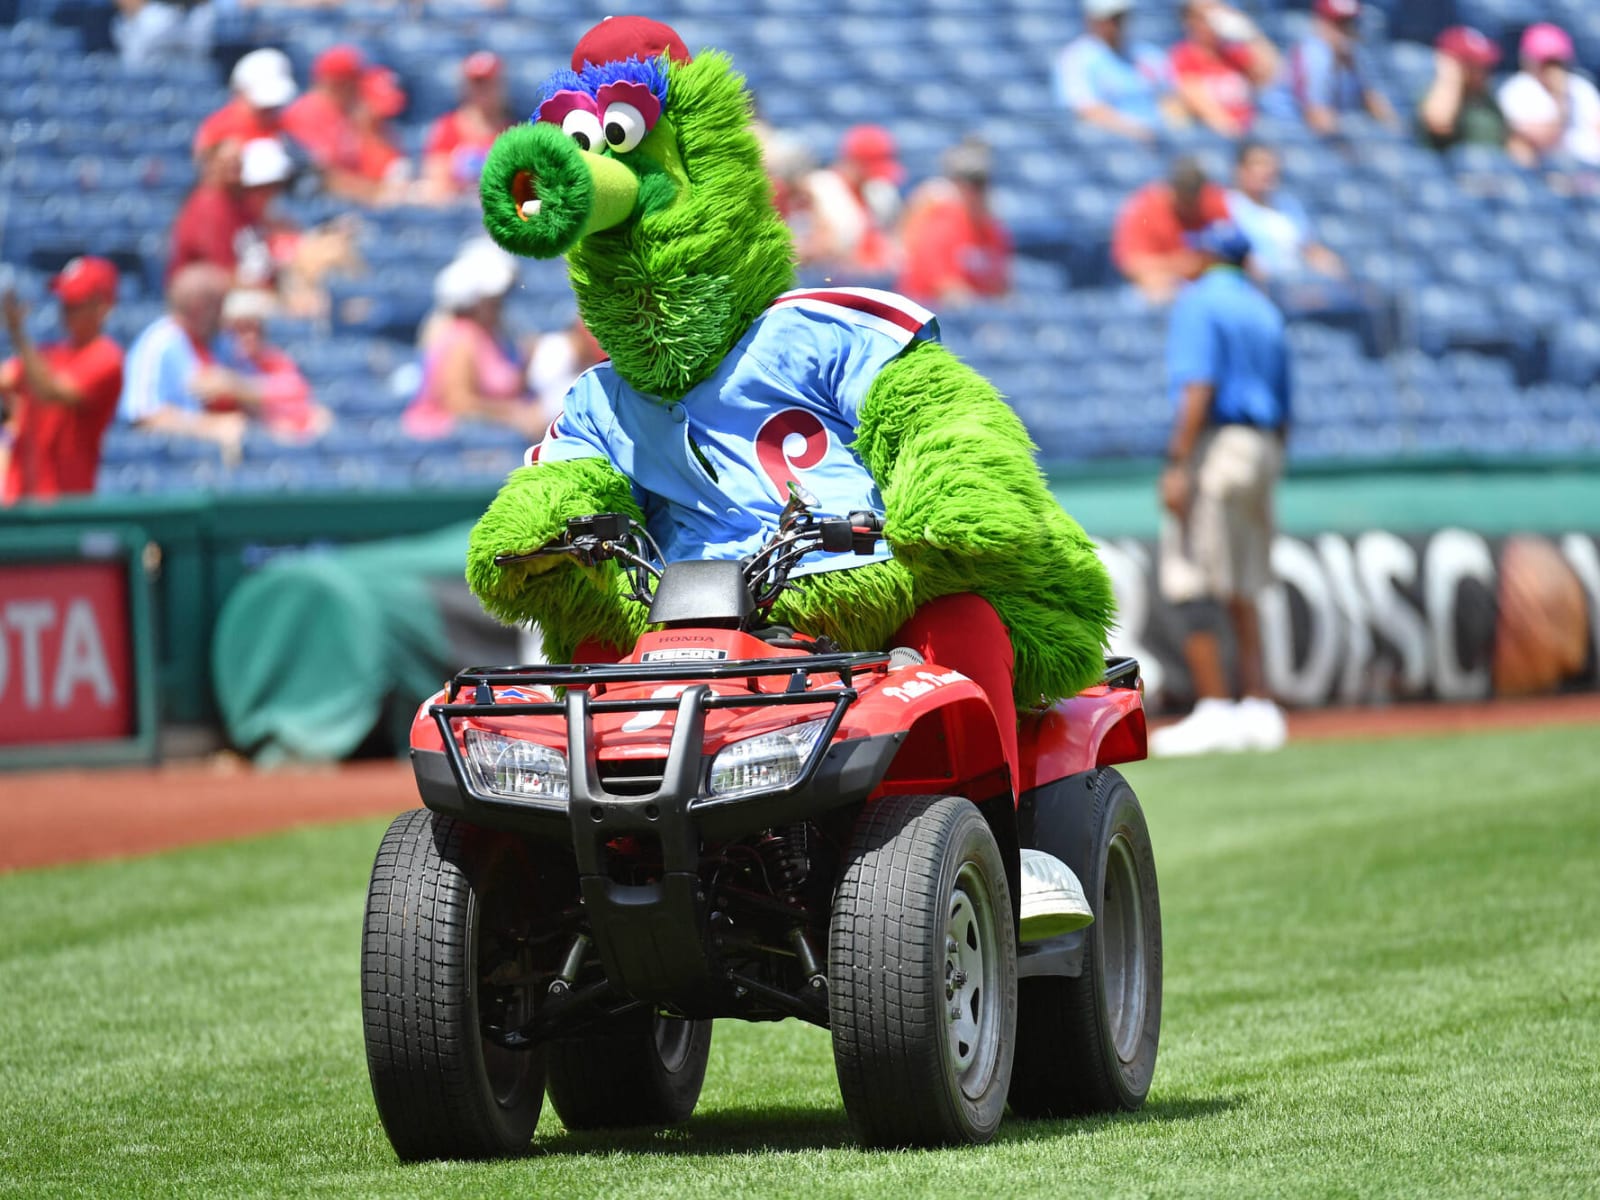 Central Scribbles with the Phillie Phanatic - MLB Central